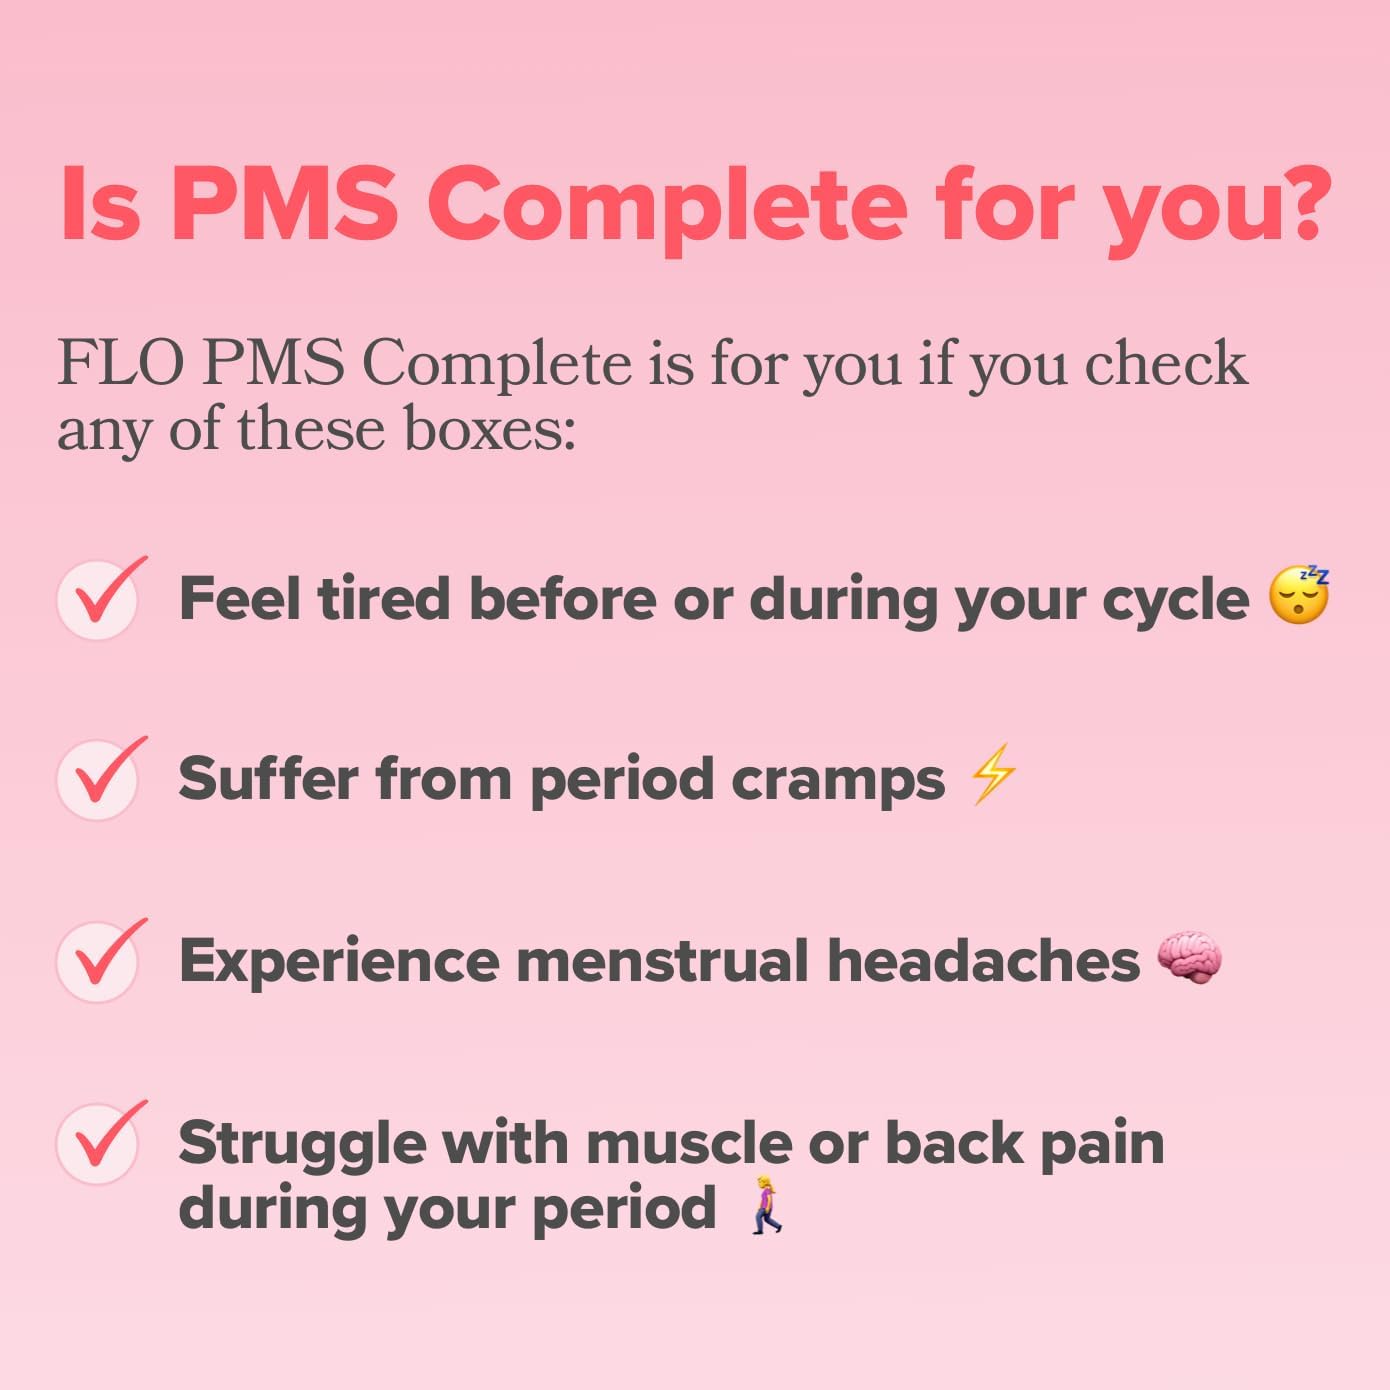 FLO PMS Complete Tablets, Menstrual Pain Relief for Women, 24 Count (3 Pack) - Multi-Symptom Pain Reliever with Acetaminophen, Caffeine, & Pyrilamine Maleate for Cramps, Headaches, Backaches, Bloating : Health & Household